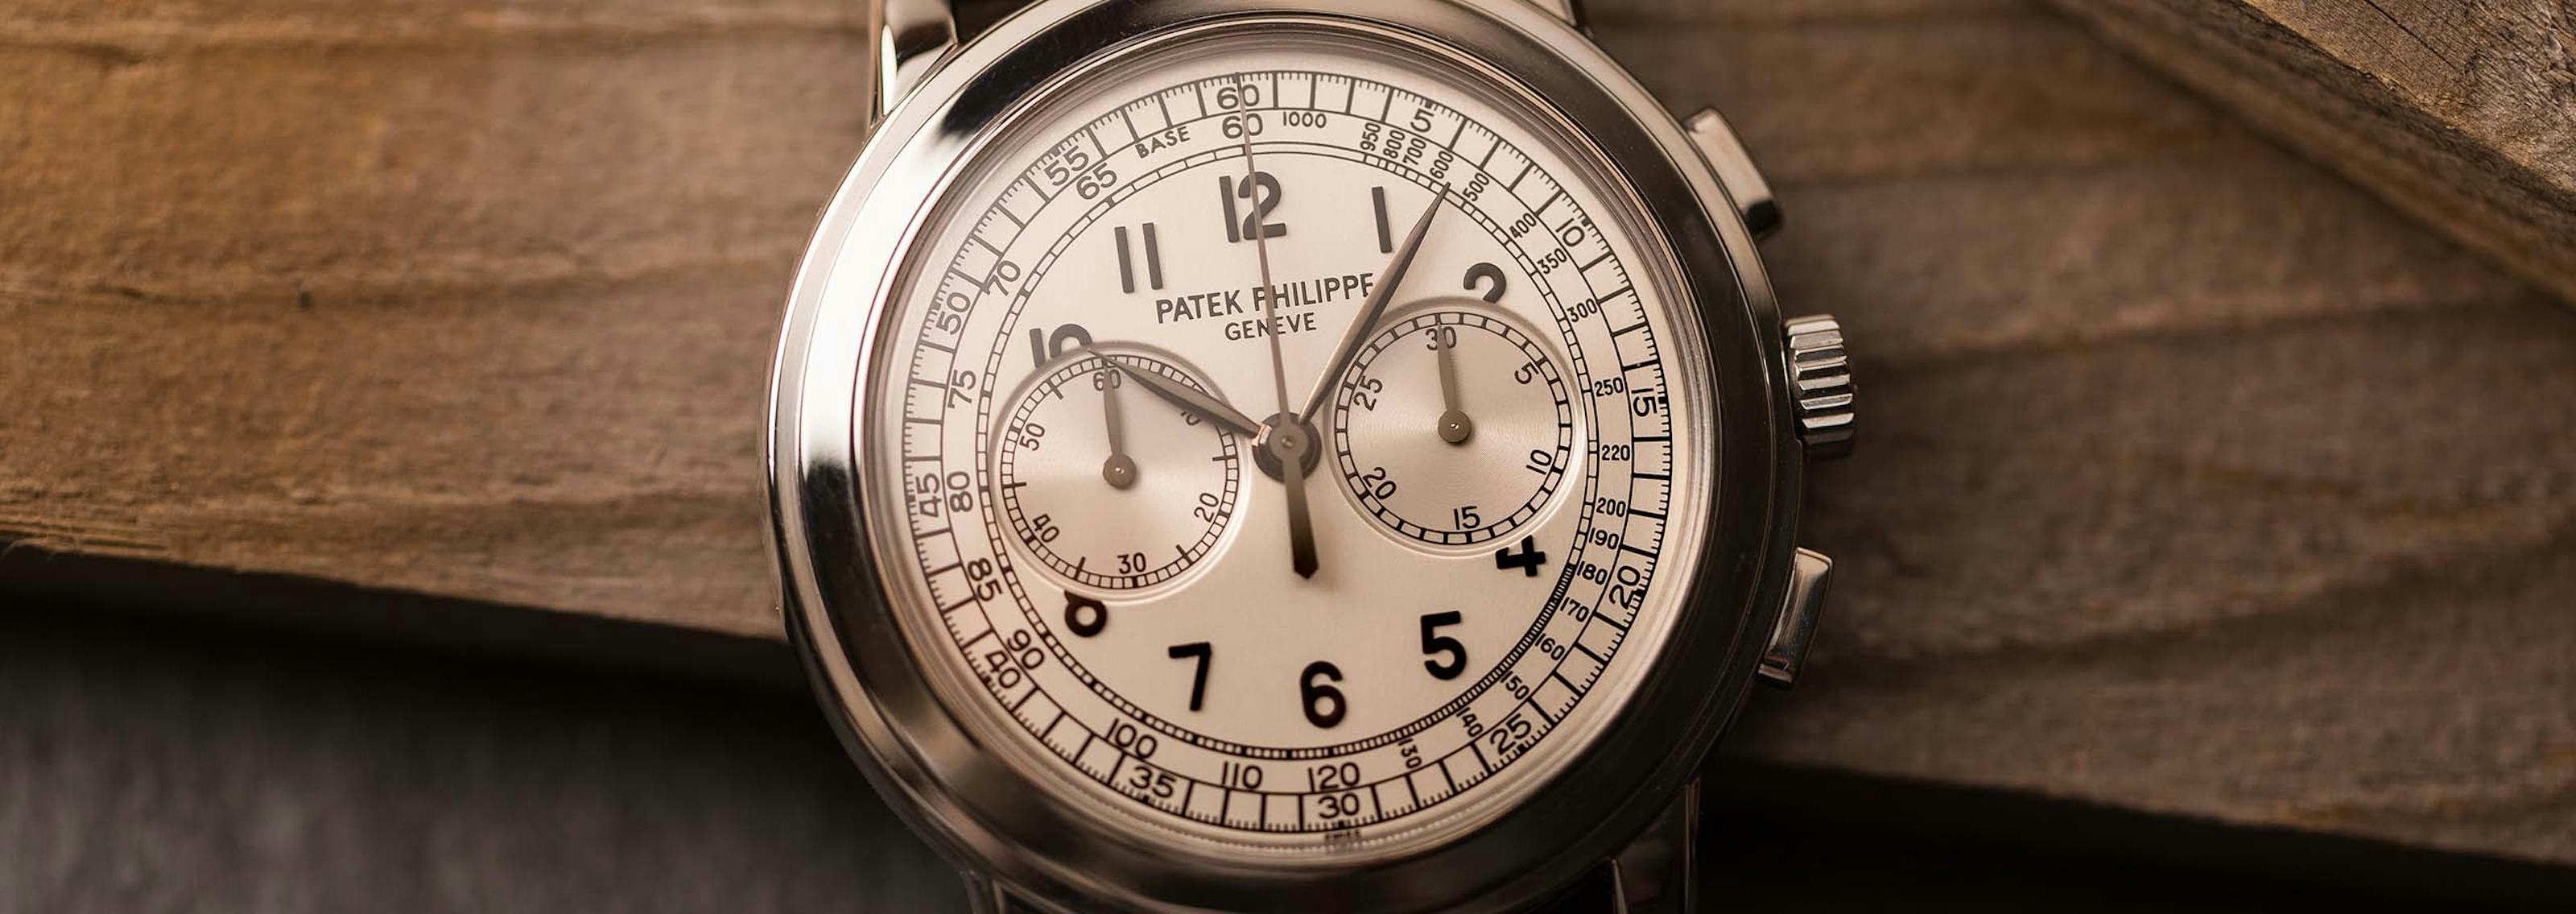 Patek Philippe: A Reference To The Past